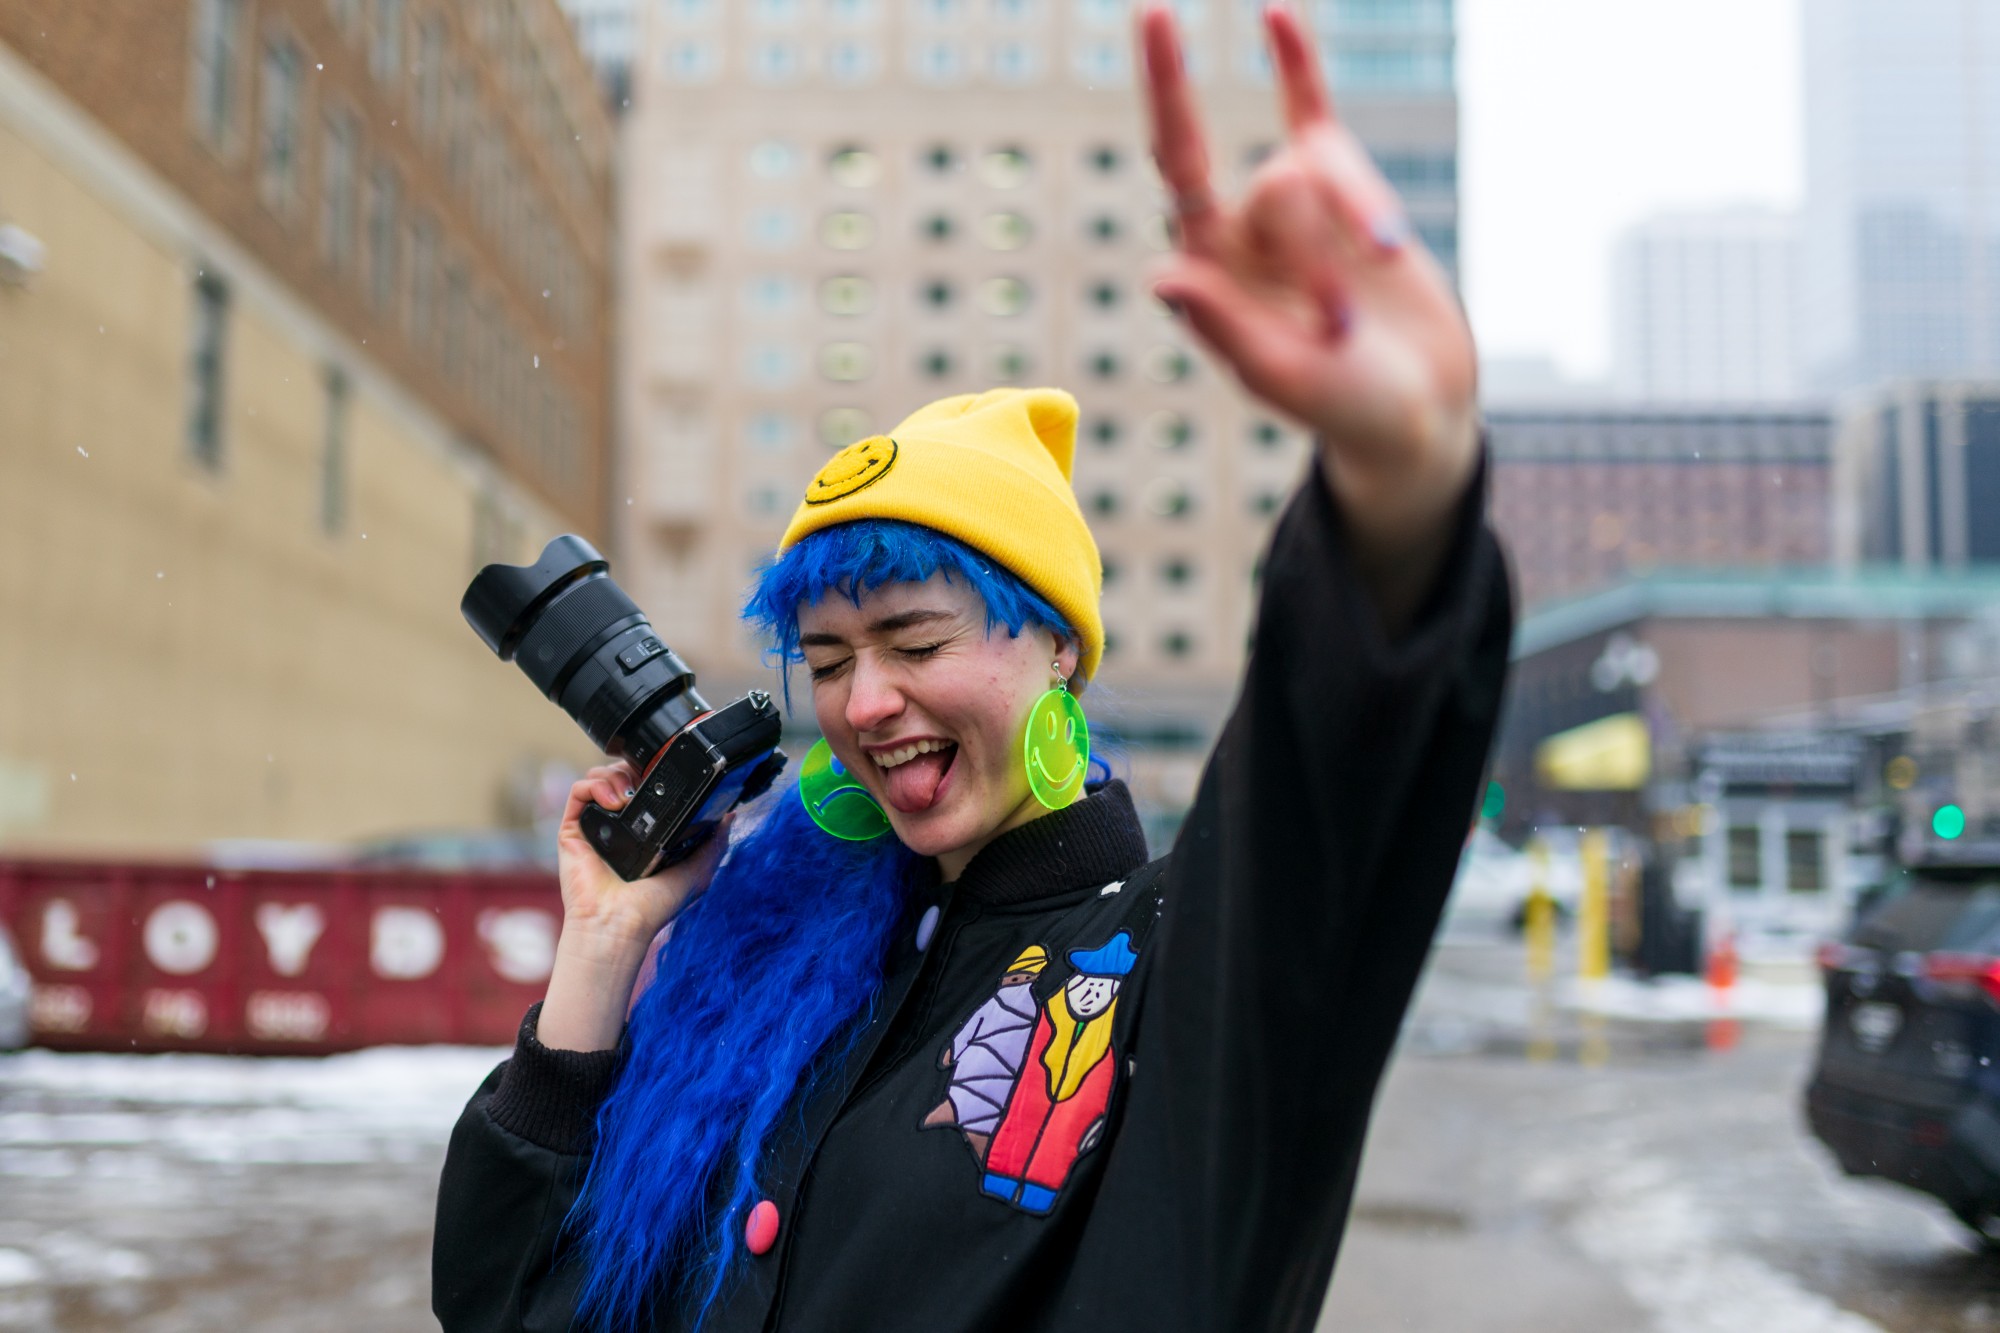 University of Minnesota Student and Social Media Influencer Bri Flasch poses for a portrait in Downtown Minneapolis on Friday, Jan. 24. Bri seeks to inspire others through her social media presence, promoting freedom of expression through her hashtags #DoEverythingYouLove and #WearWhateverYouWant. 